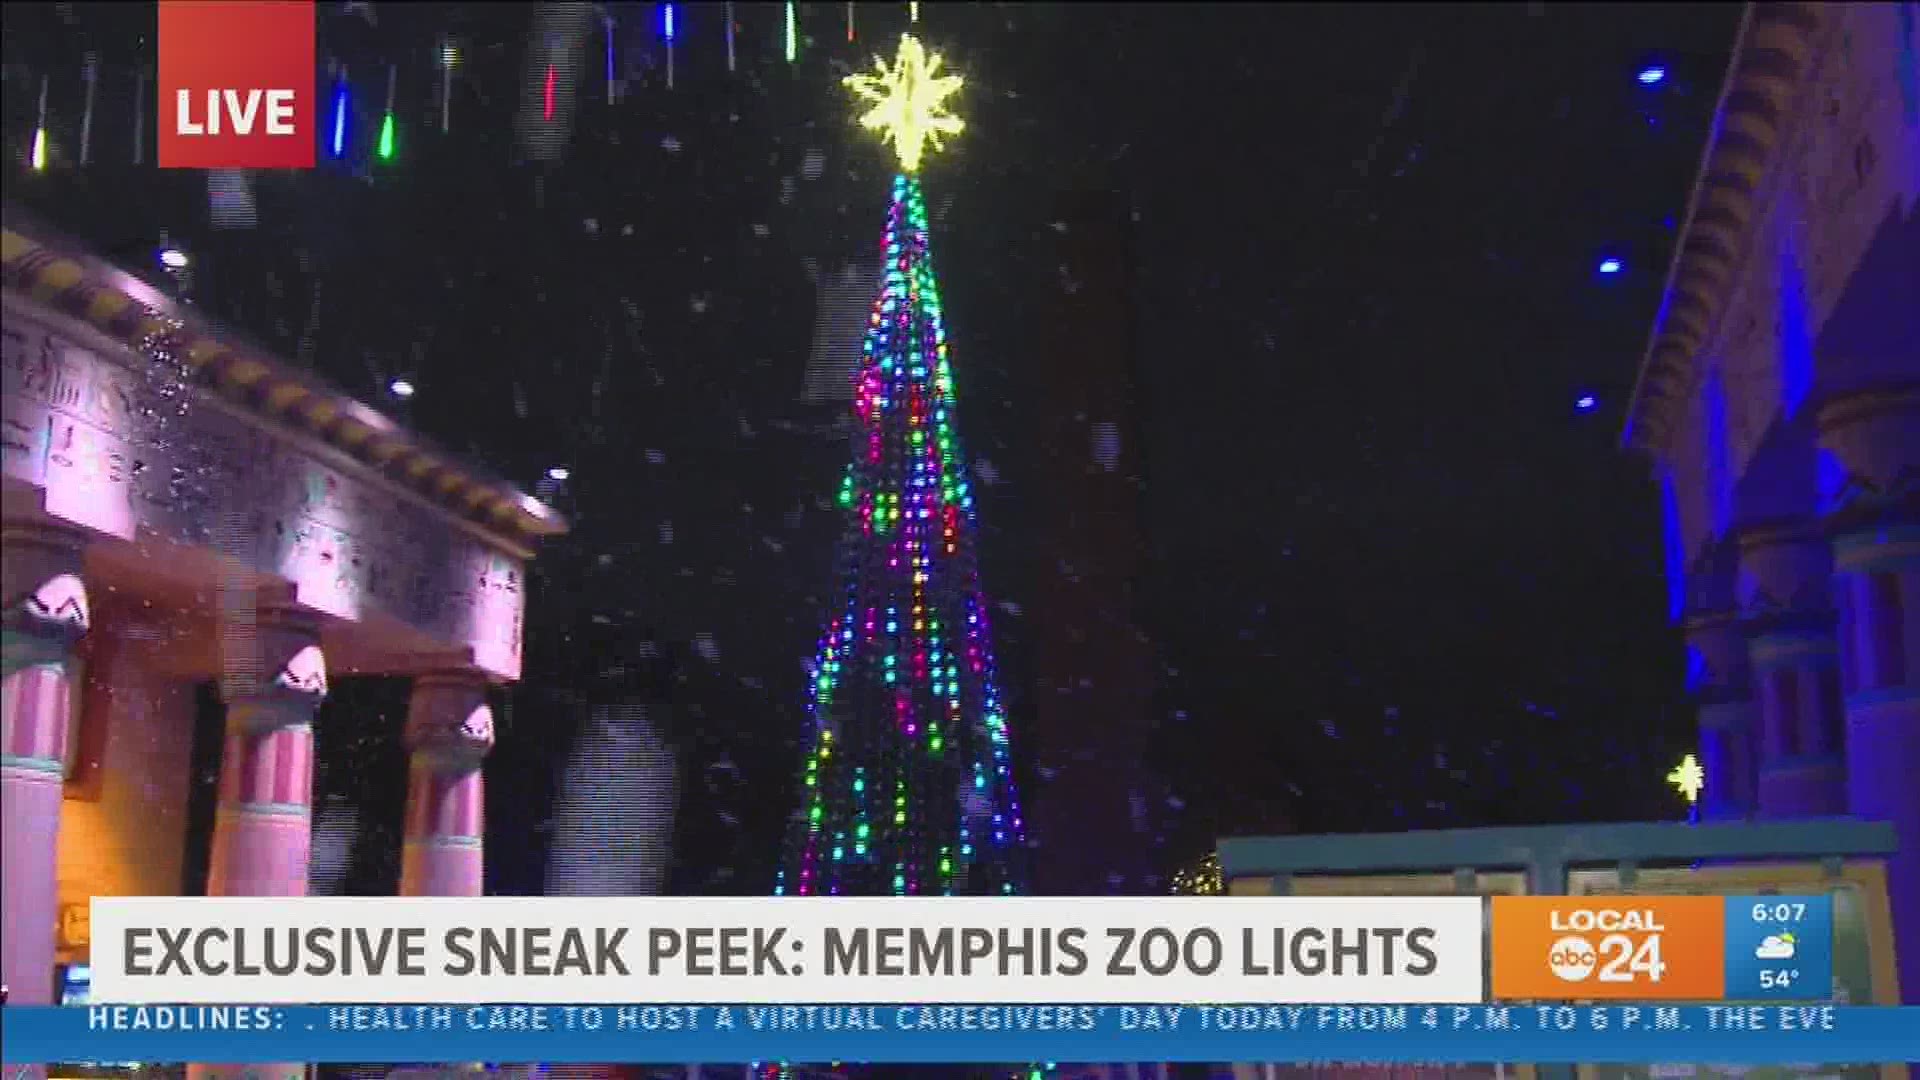 More than a million lights make up the annual Zoo Lights display at the Memphis Zoo